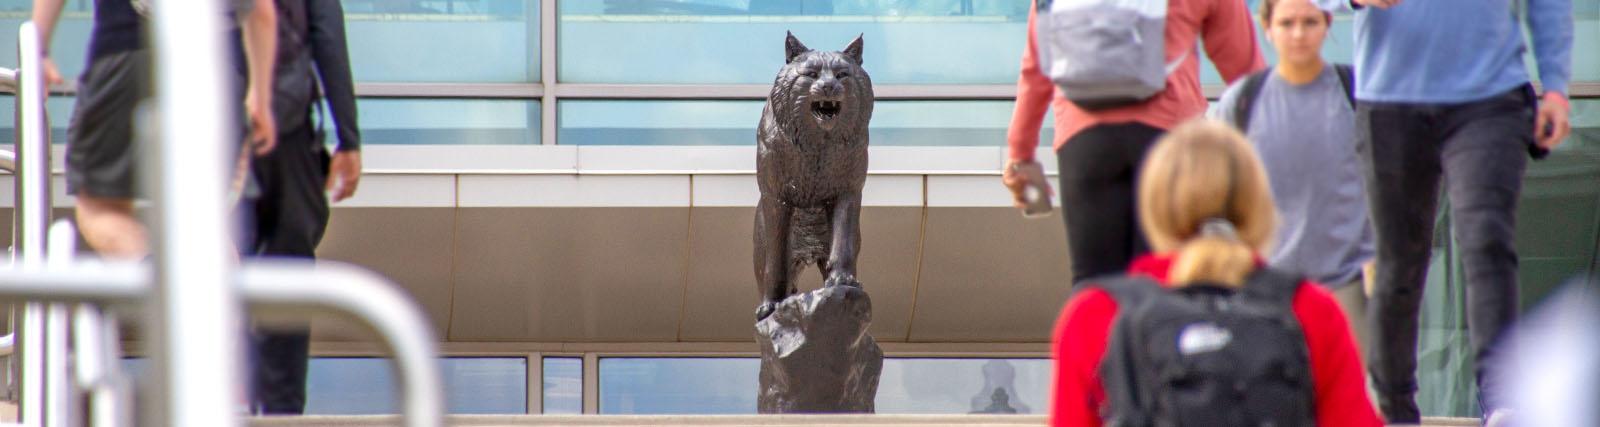 bobcat statue and students leaving class